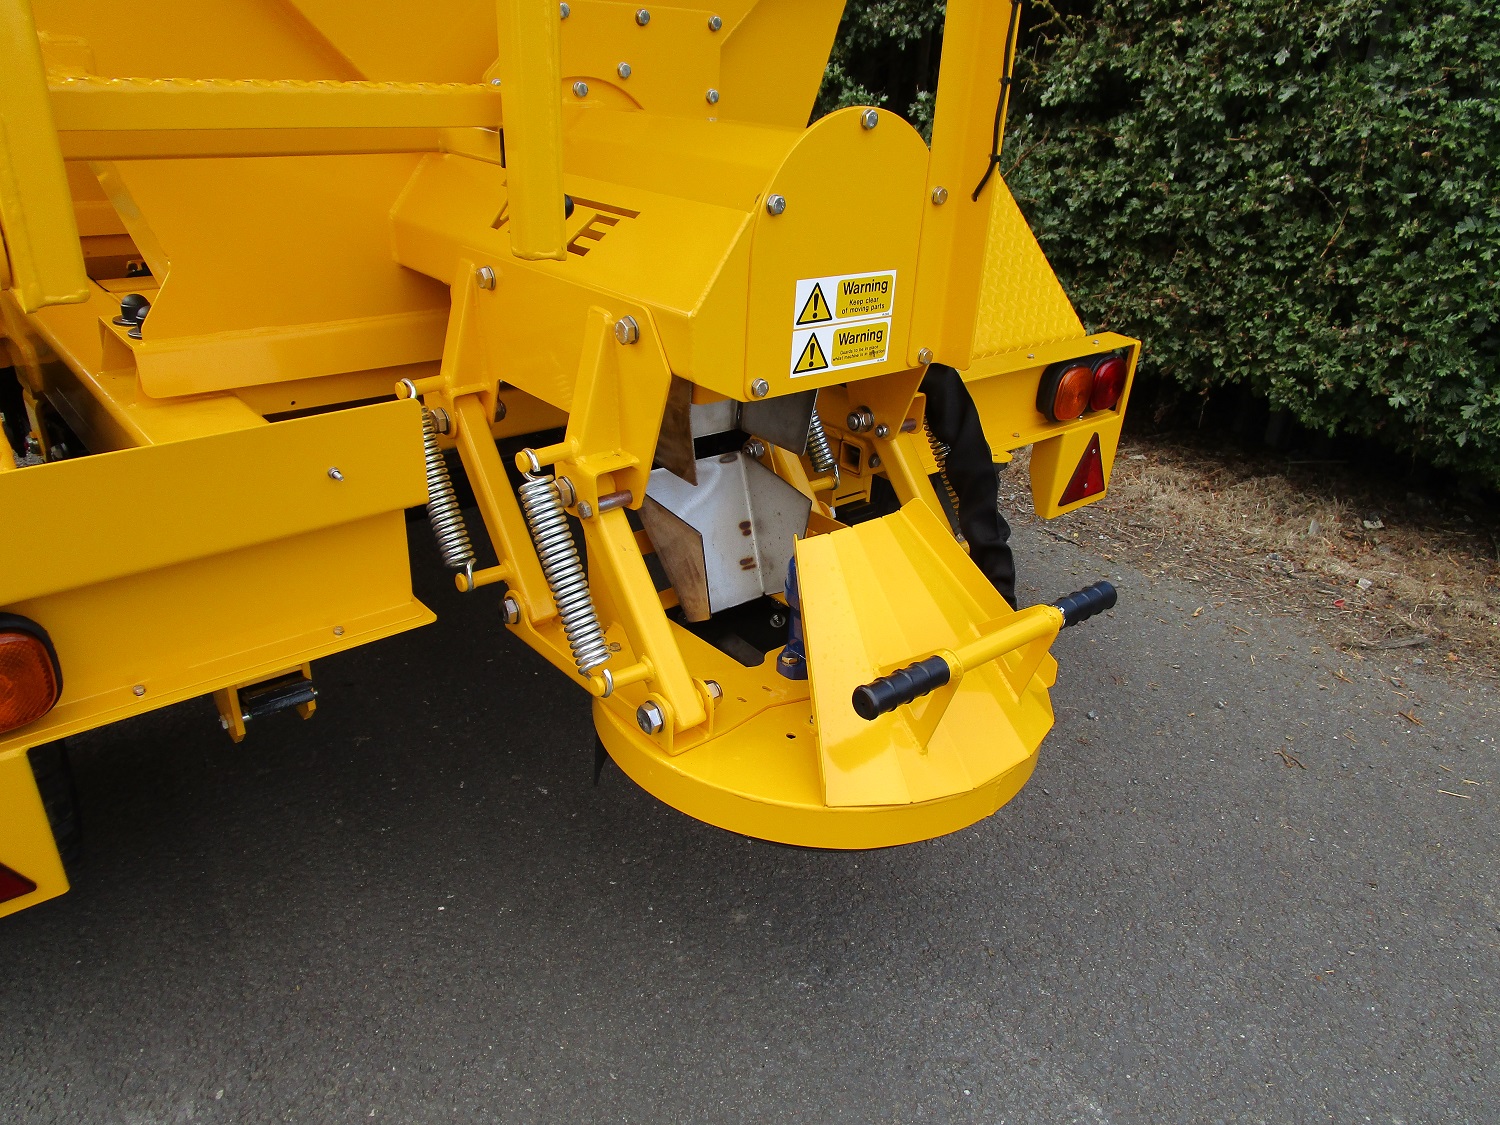 Tractor Towed Salt Spreader (Gritter) VALE TS6000 - • Hydraulically driven stainless steel disc, with adjustable spread width from 1.8m to 12m